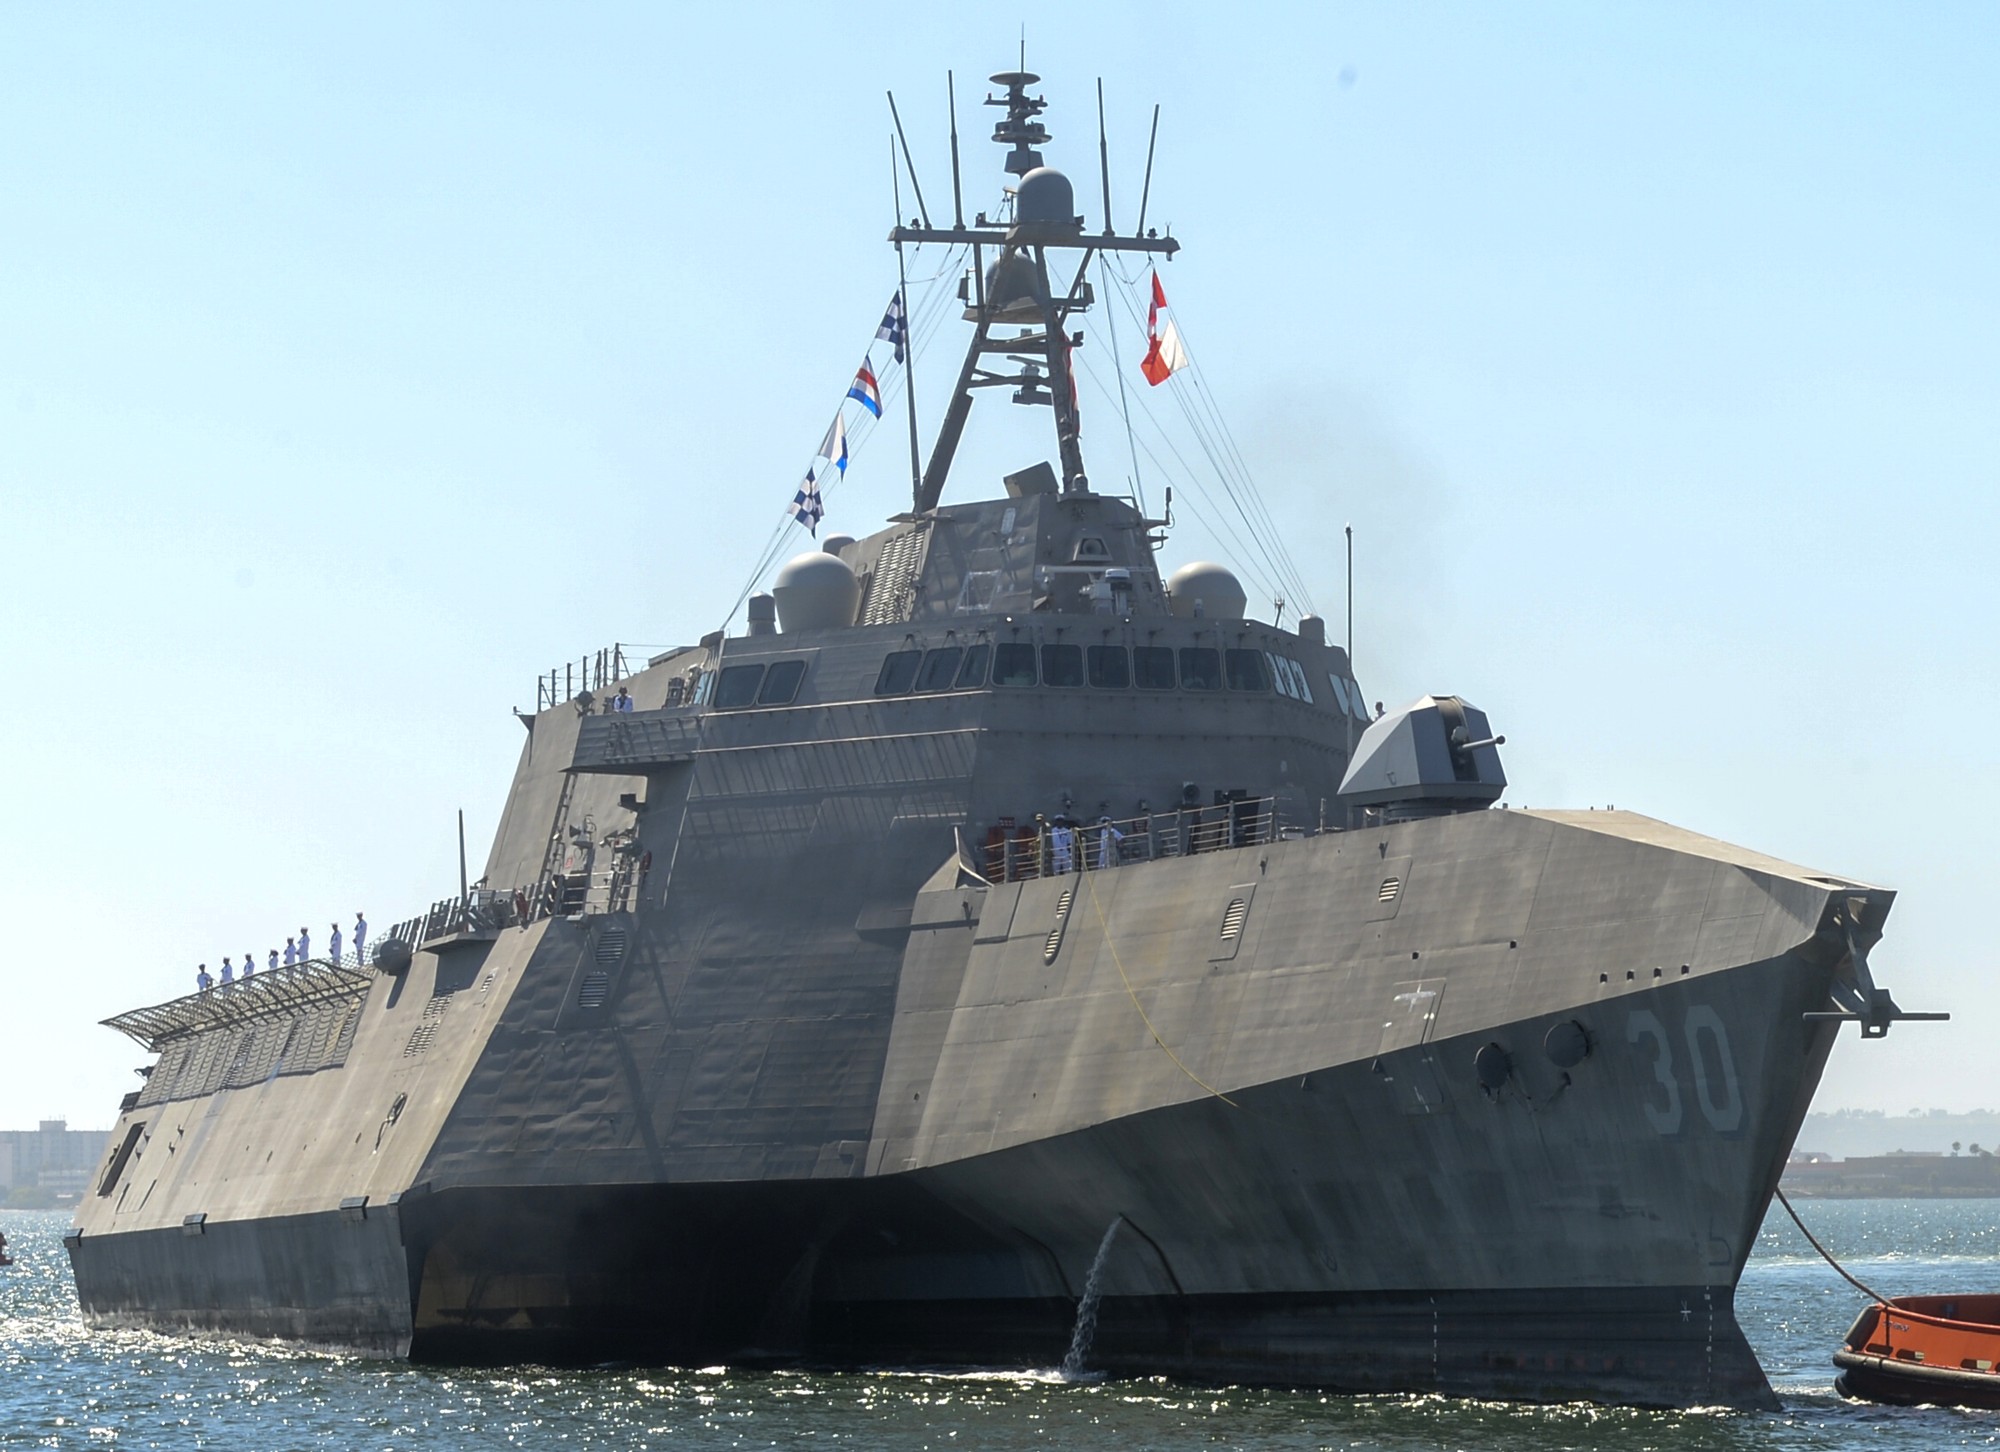 lcs-30 uss canberra littoral combat ship independence class us navy returning san diego california 20